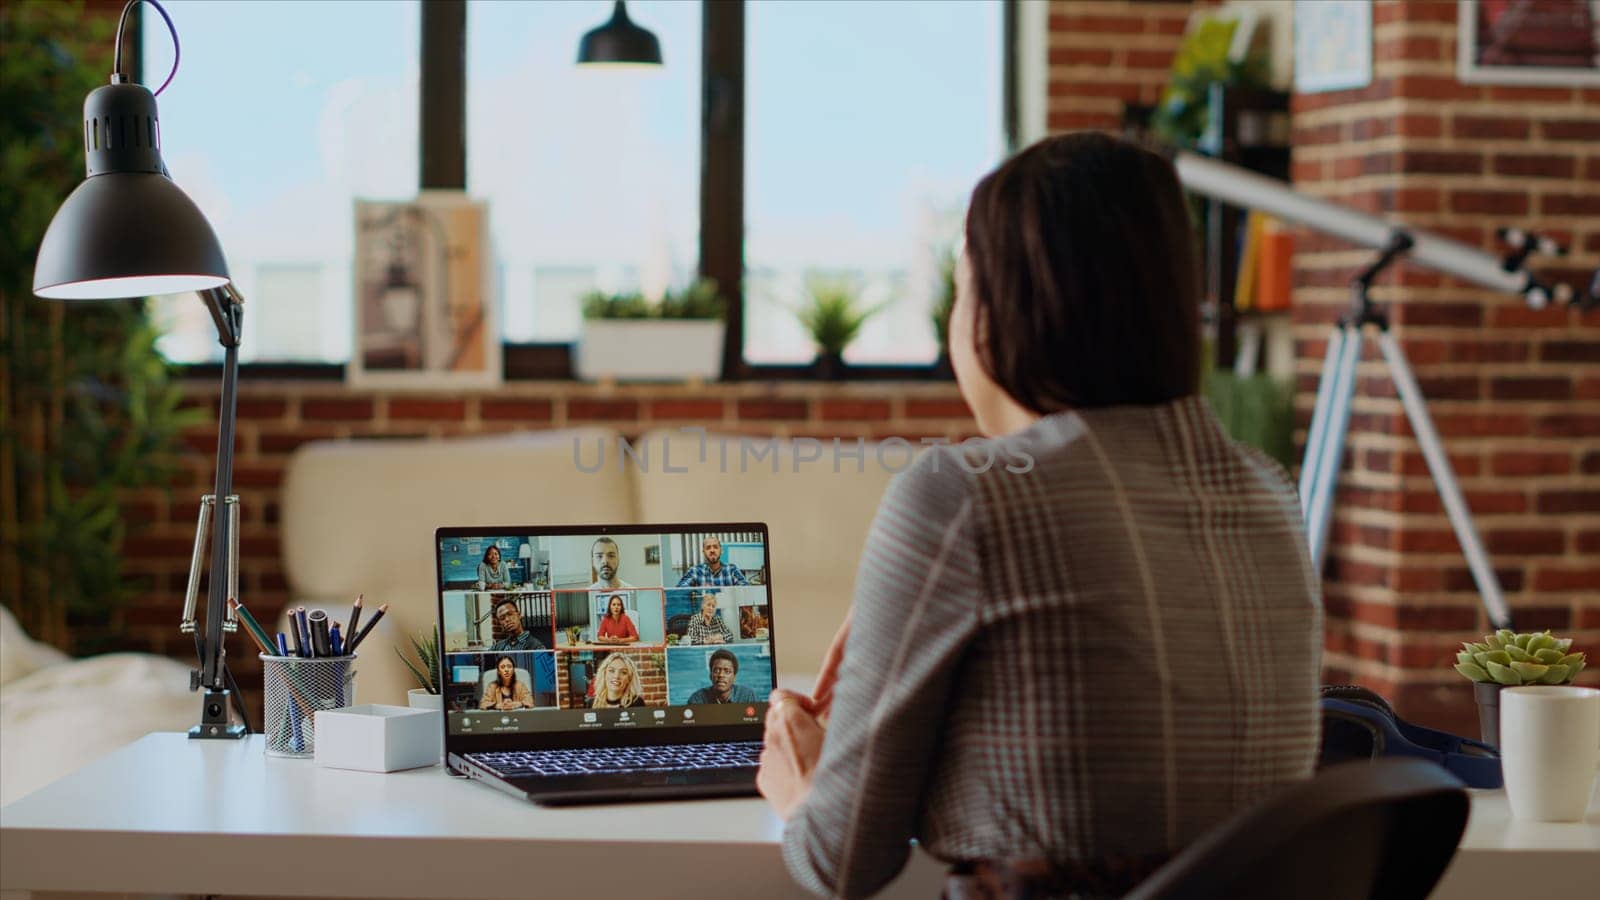 Teleworker at home participating in internet videocall with colleagues, by DCStudio